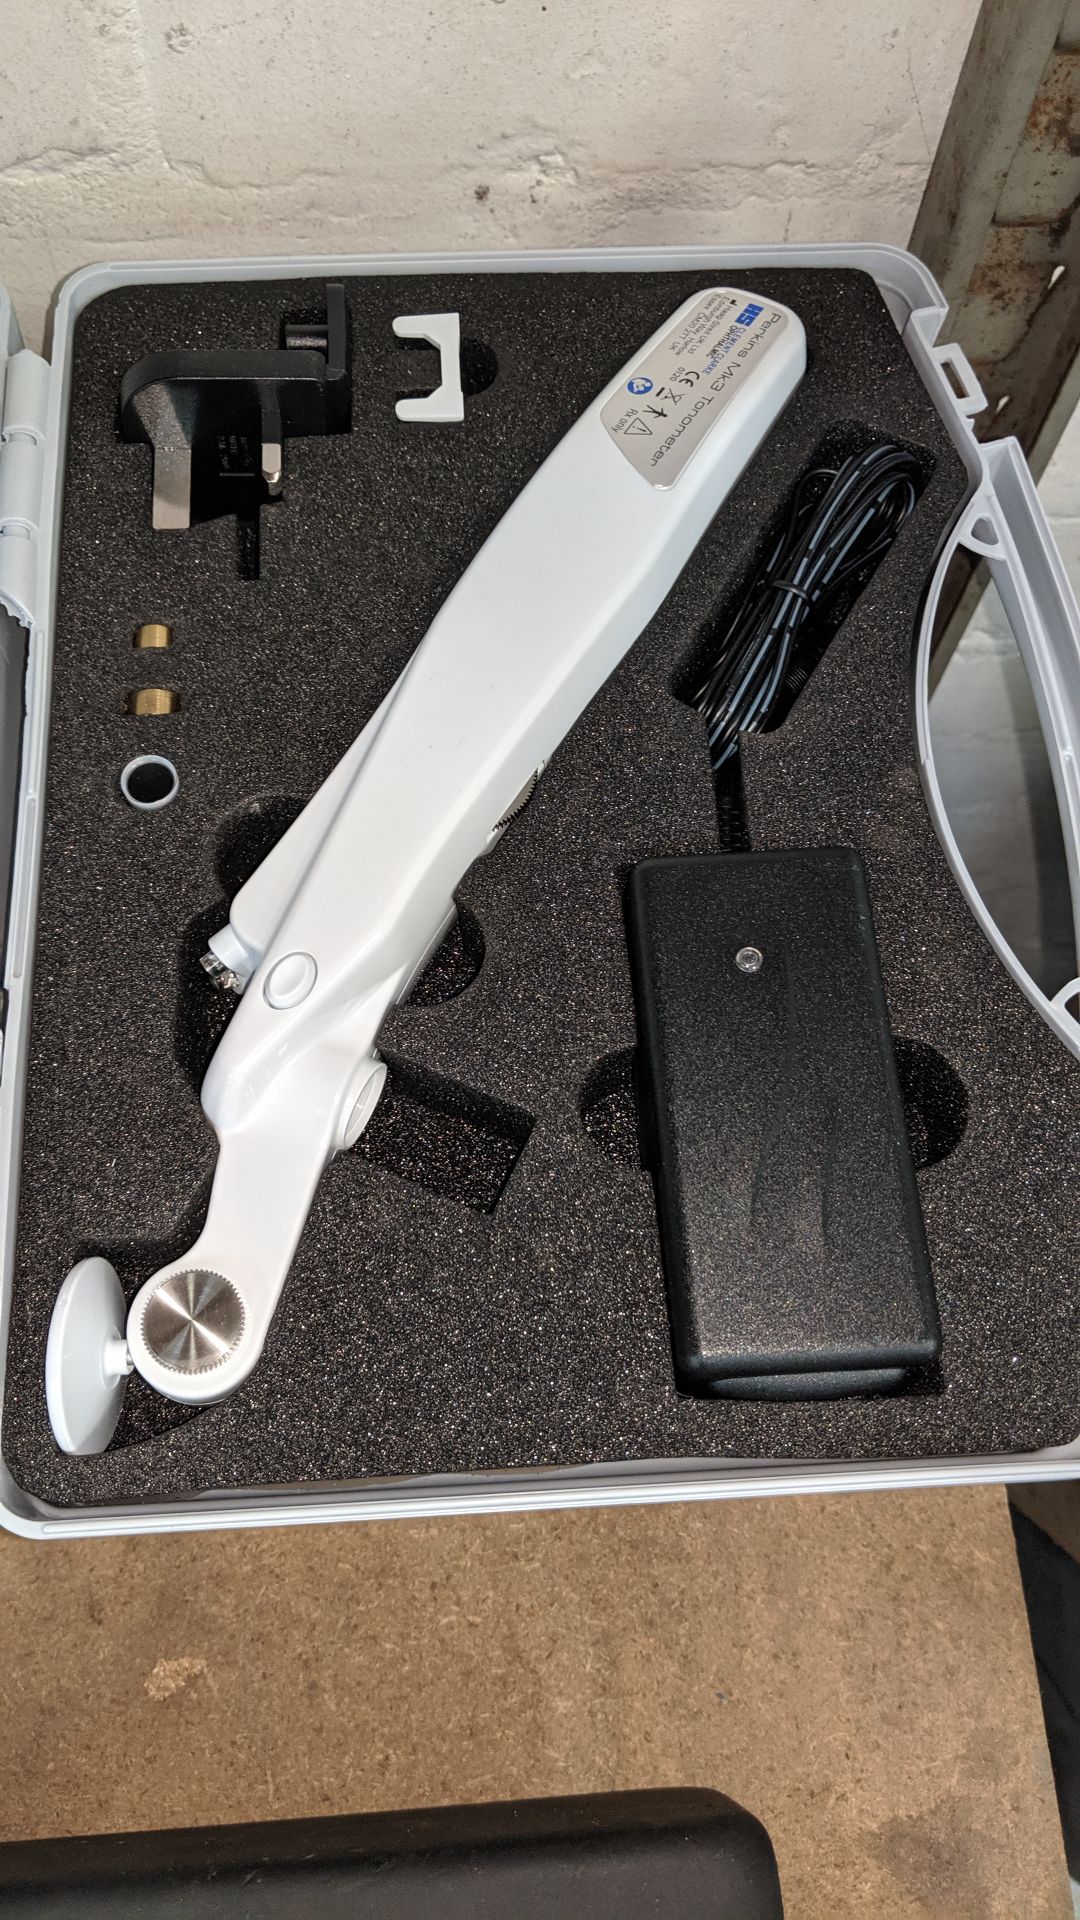 Perkins Mark 3 hand-held applanation tonometer in case including box All the lots in this auction - Image 3 of 4